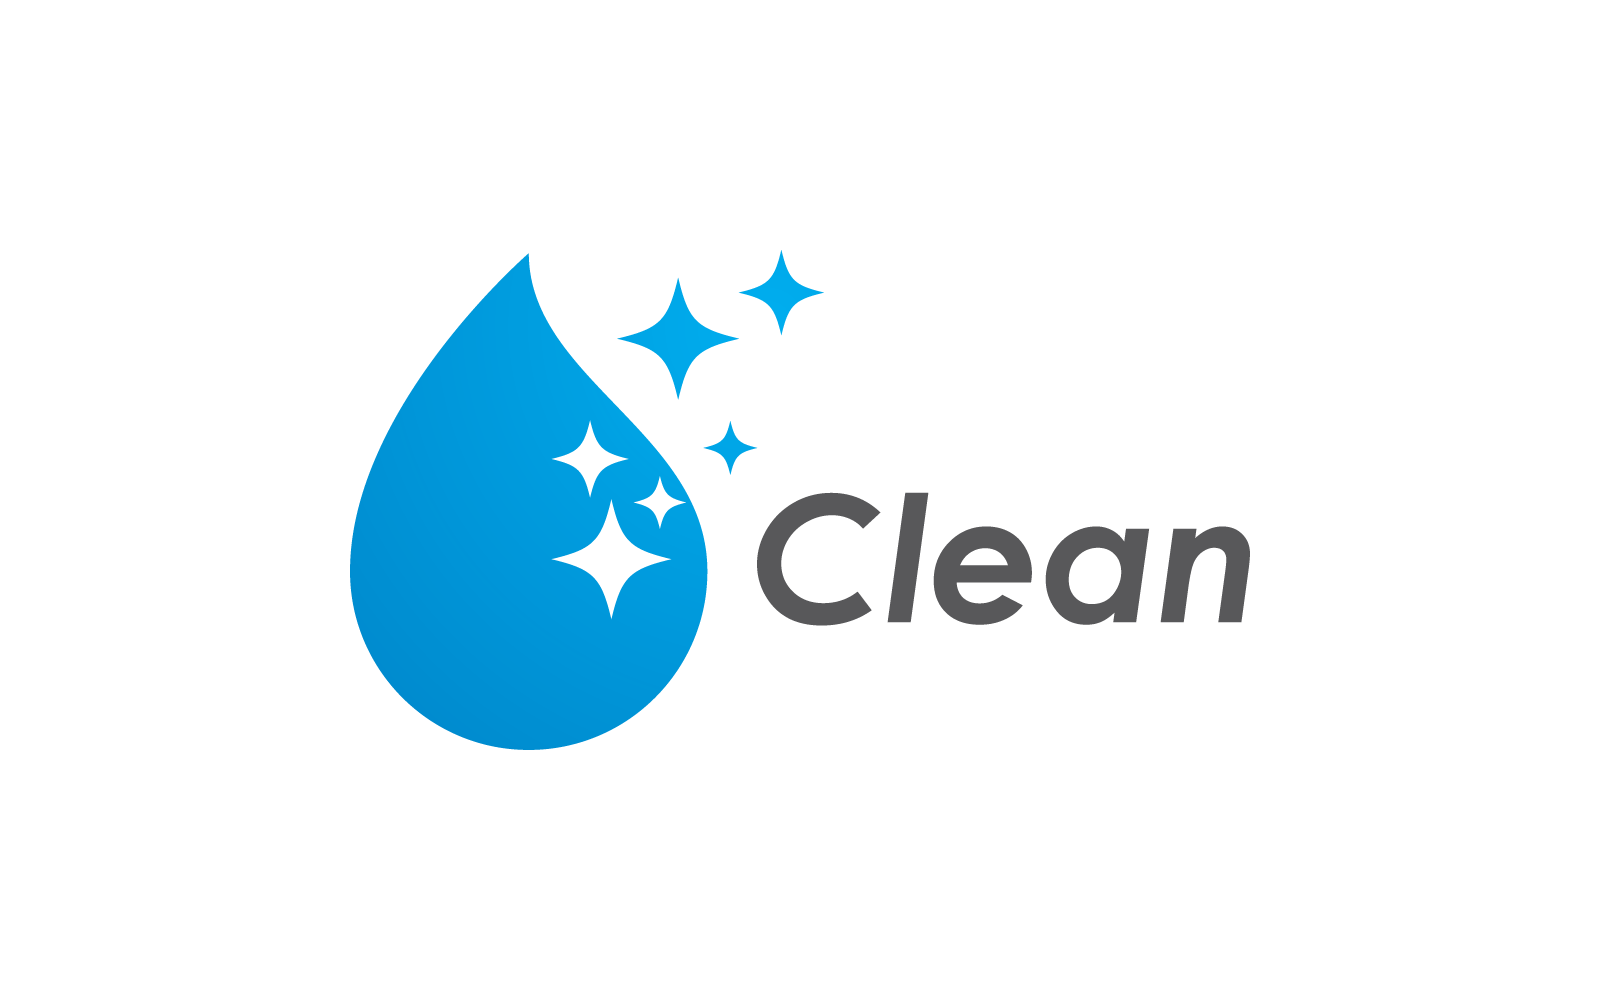 Cleaning logo and symbol vector design Logo Template